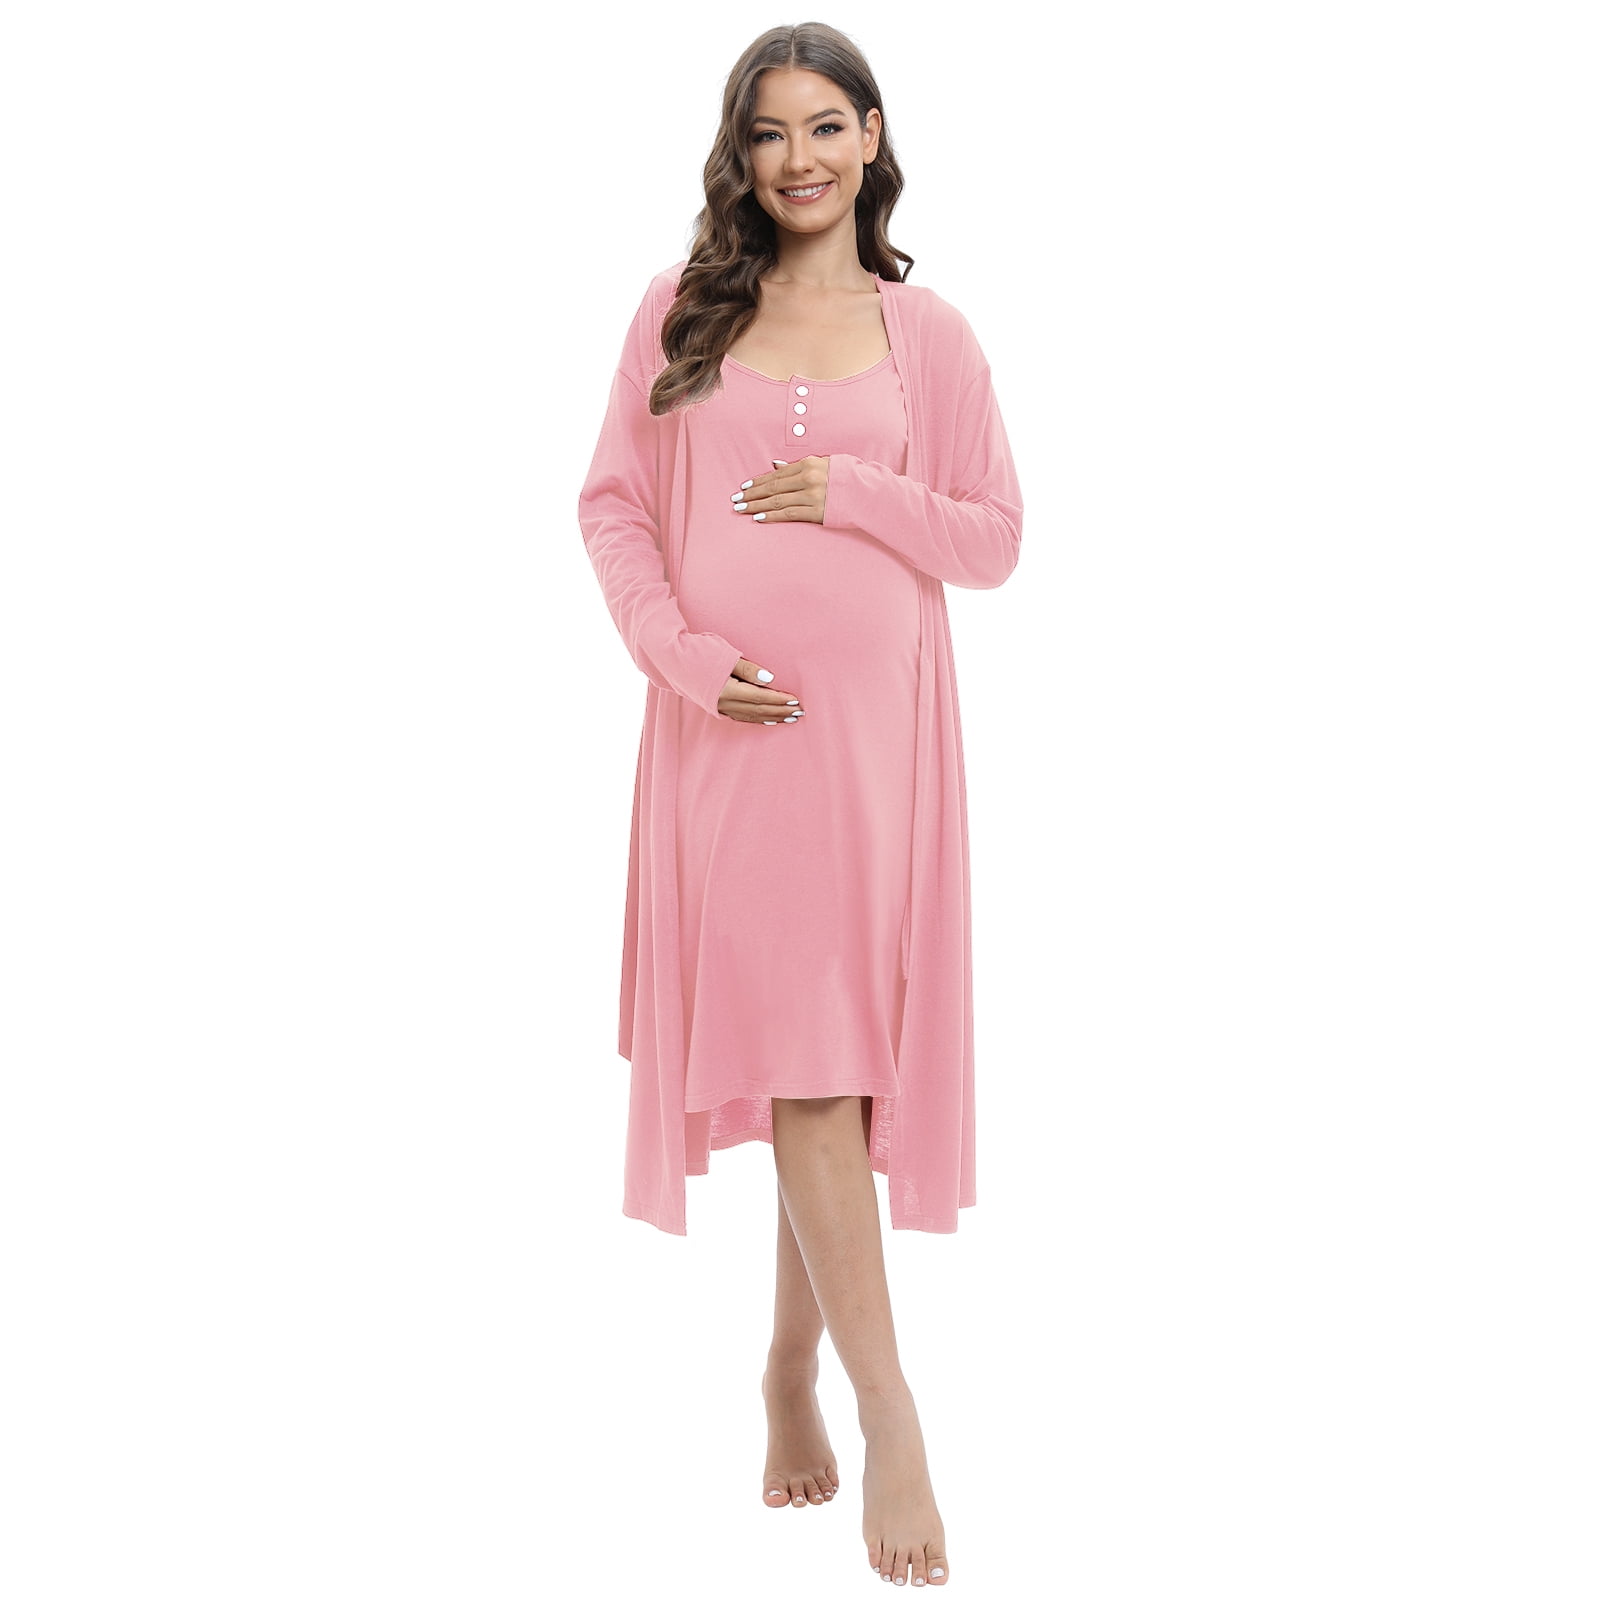 3 in 1 Nursing Nightgowns for Breastfeeding Delivery Labor